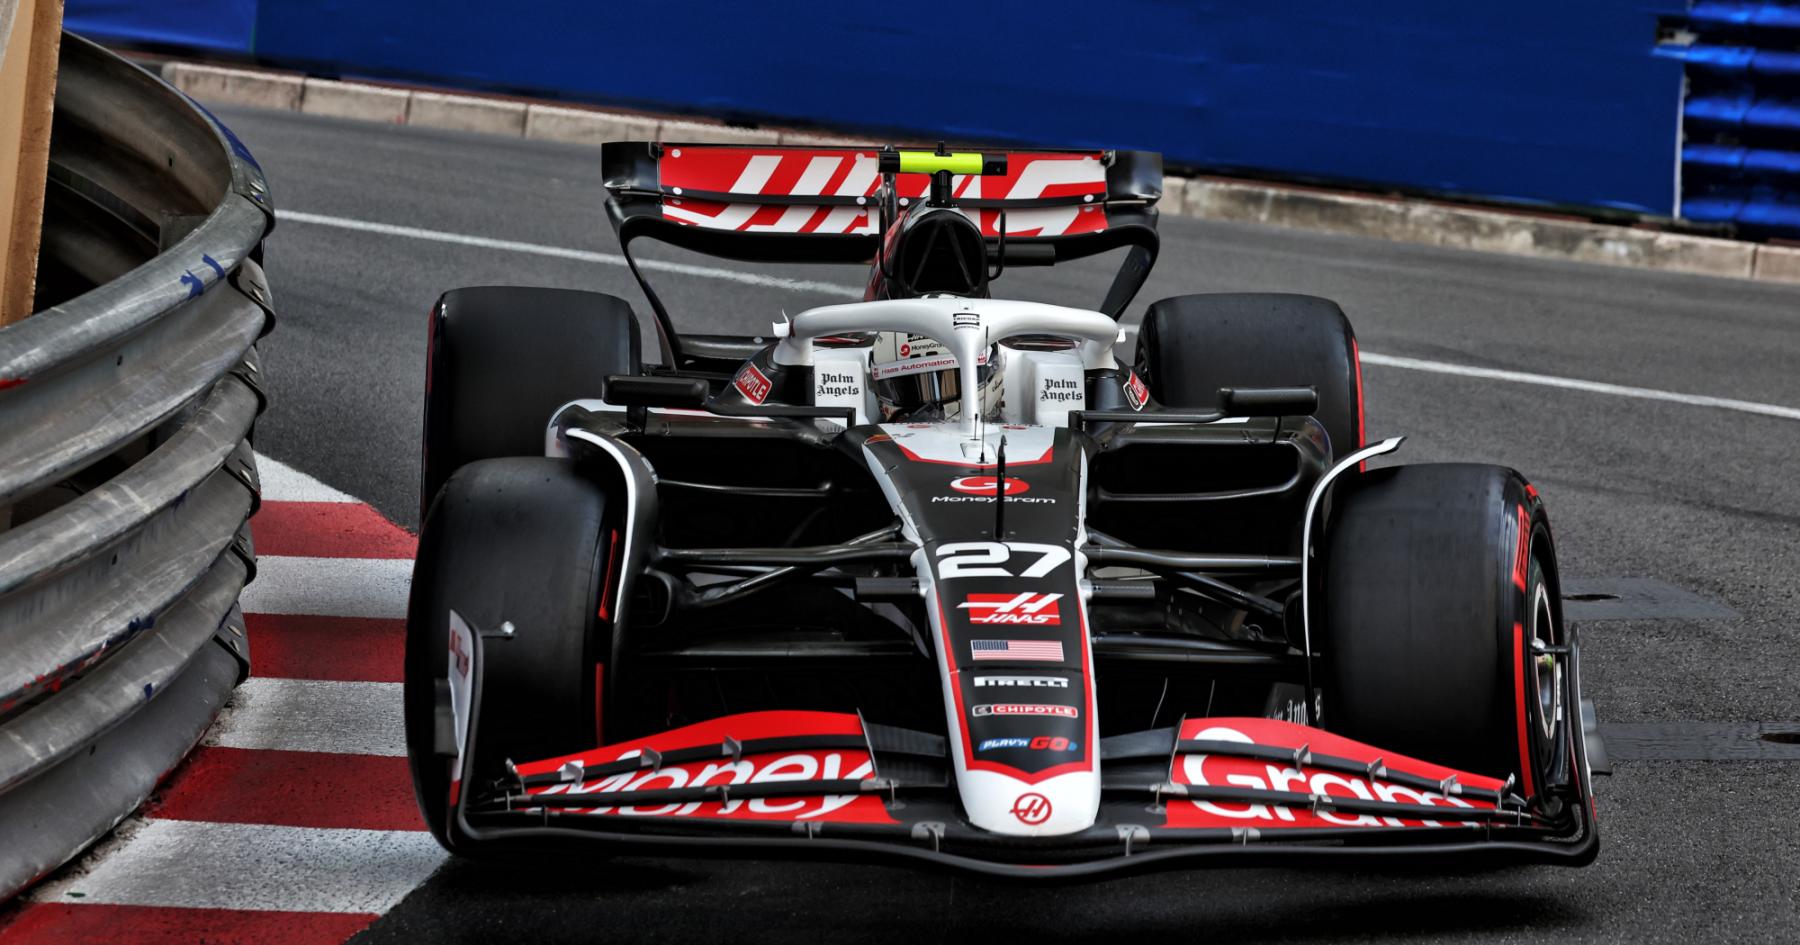 Haas Team Delivers Candid Account of Double Monaco Qualifying Disqualification